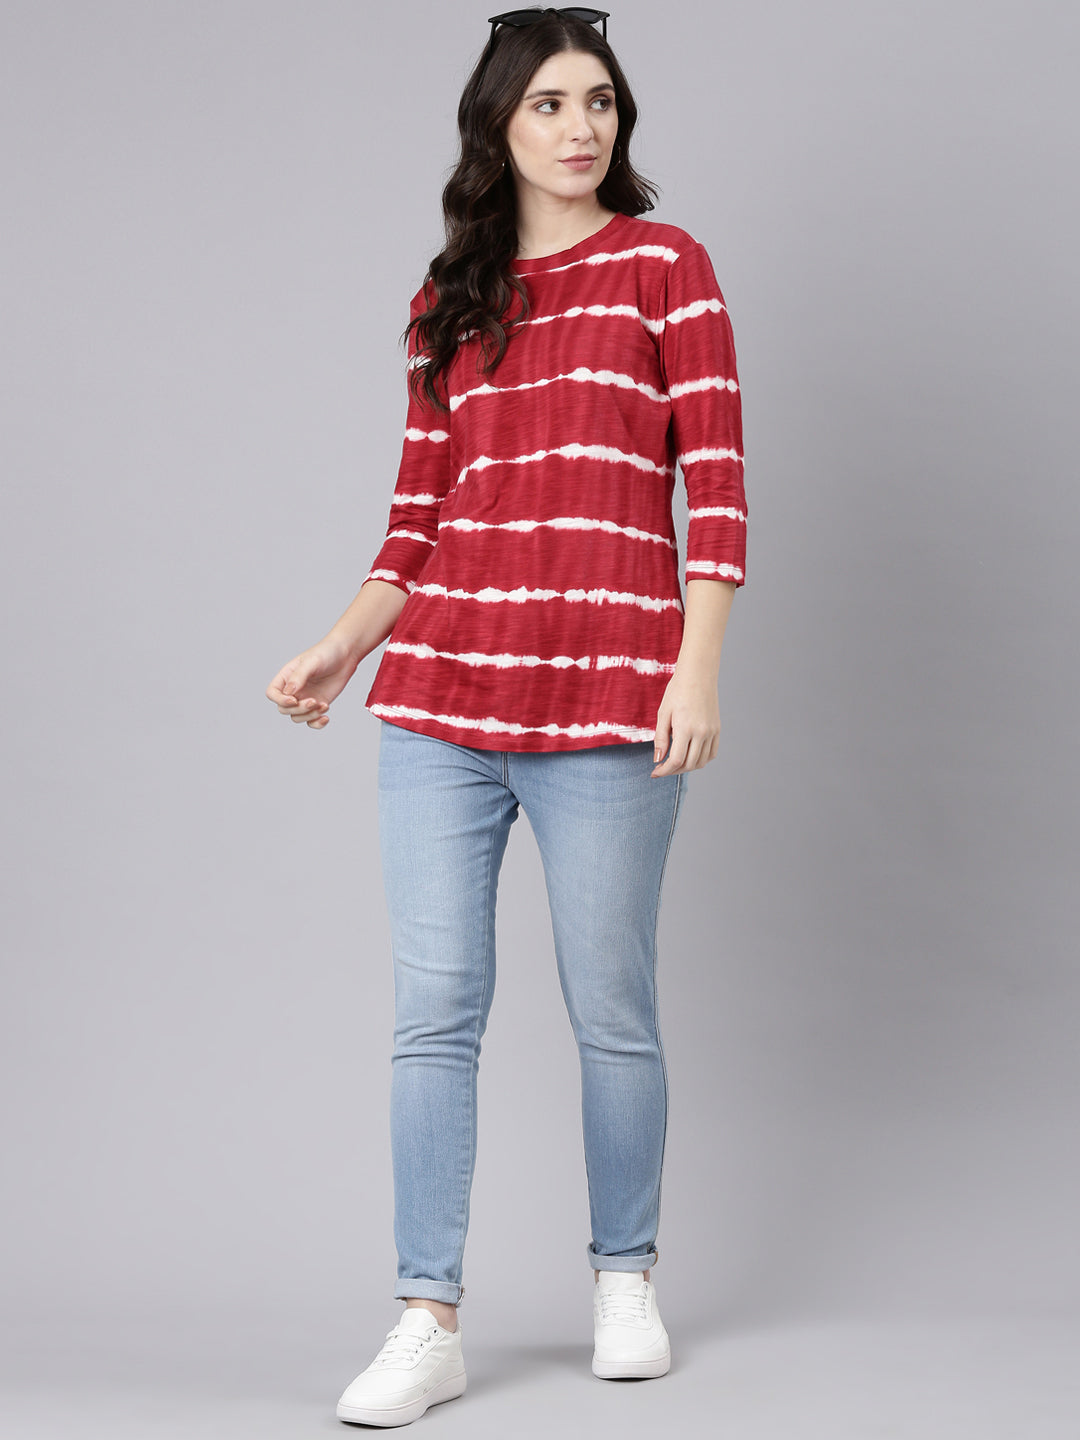 Buy TheShaili Casual Round Neck Top for Women's /girls/ office/party/casual online